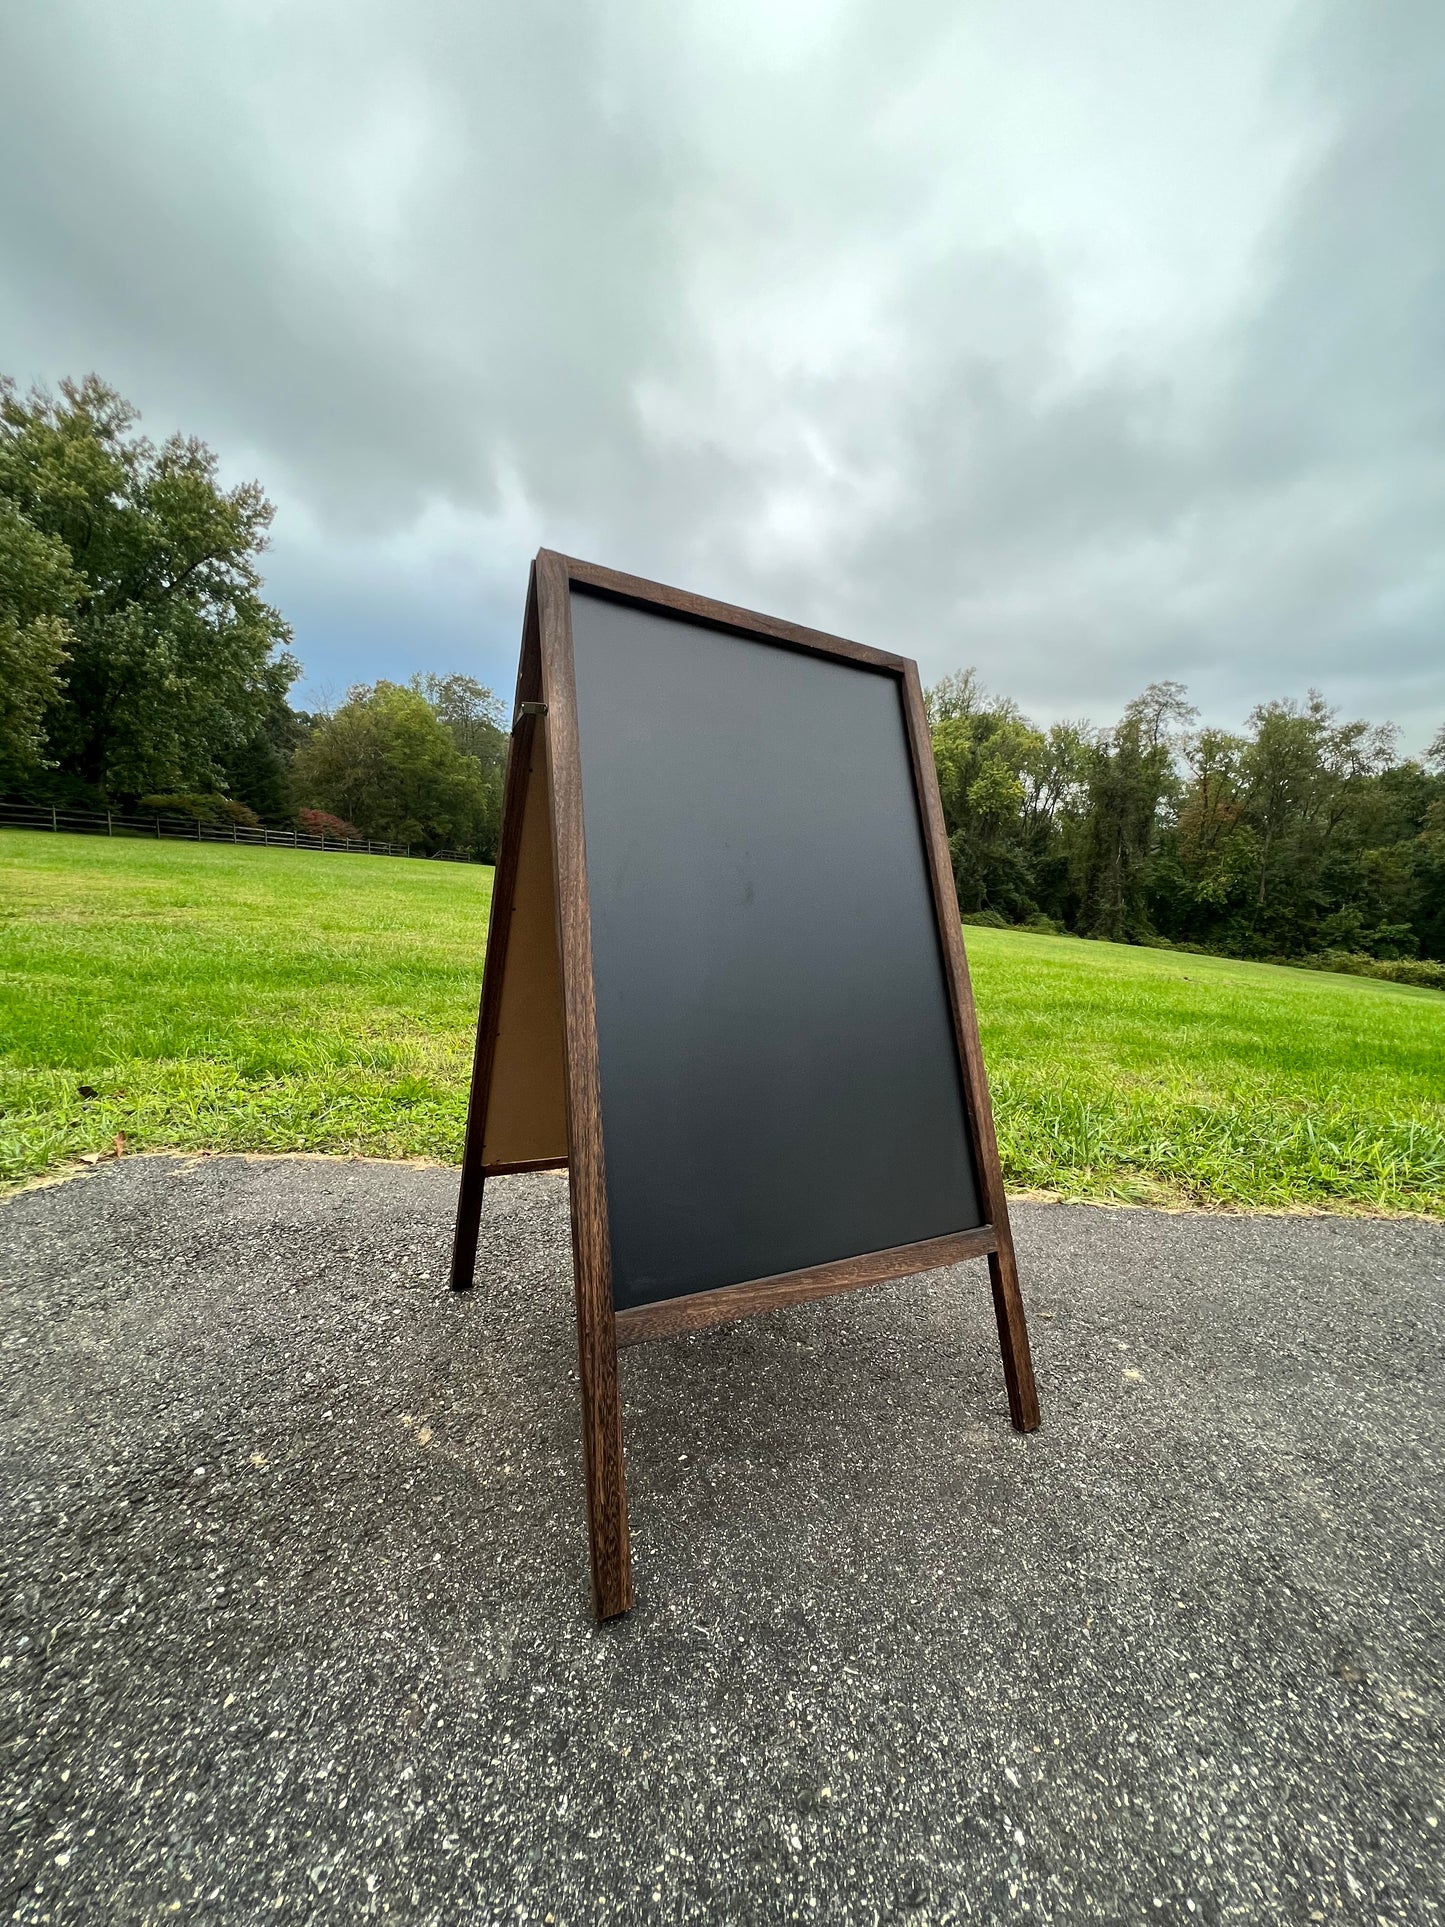 Double Sided Chalkboard Sign ***12 Hour Rental Only***Delivery within Southeast PA only***